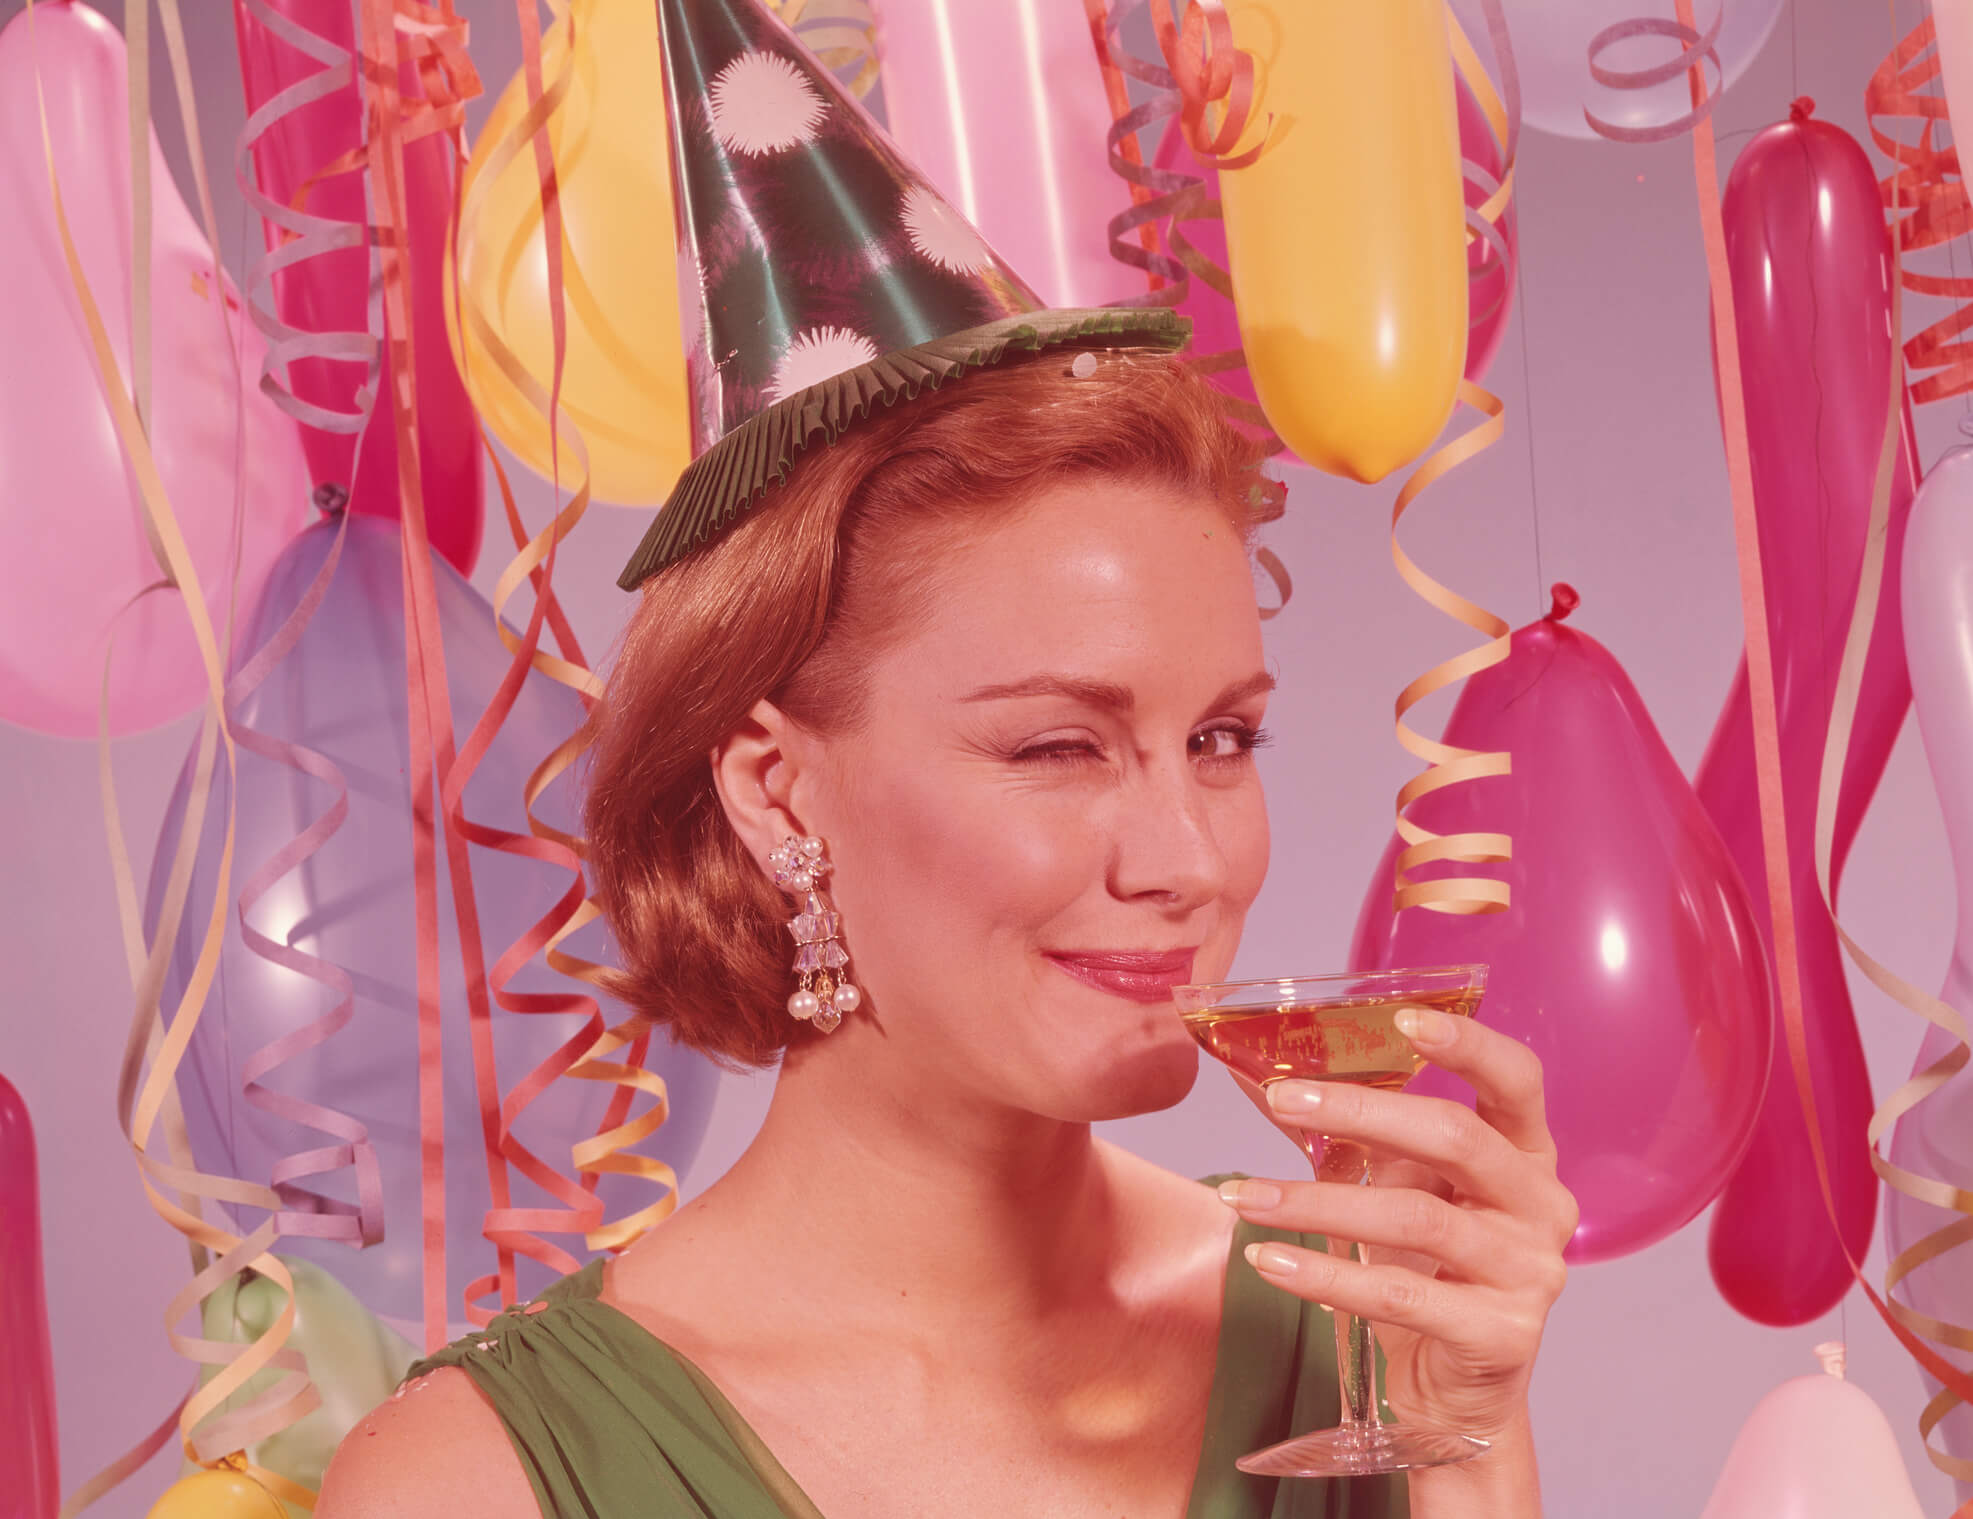 Woman at party, wearing party hat and winking, holding glass of wine. (Photo by H. Armstrong Roberts/Retrofile/Getty Images)